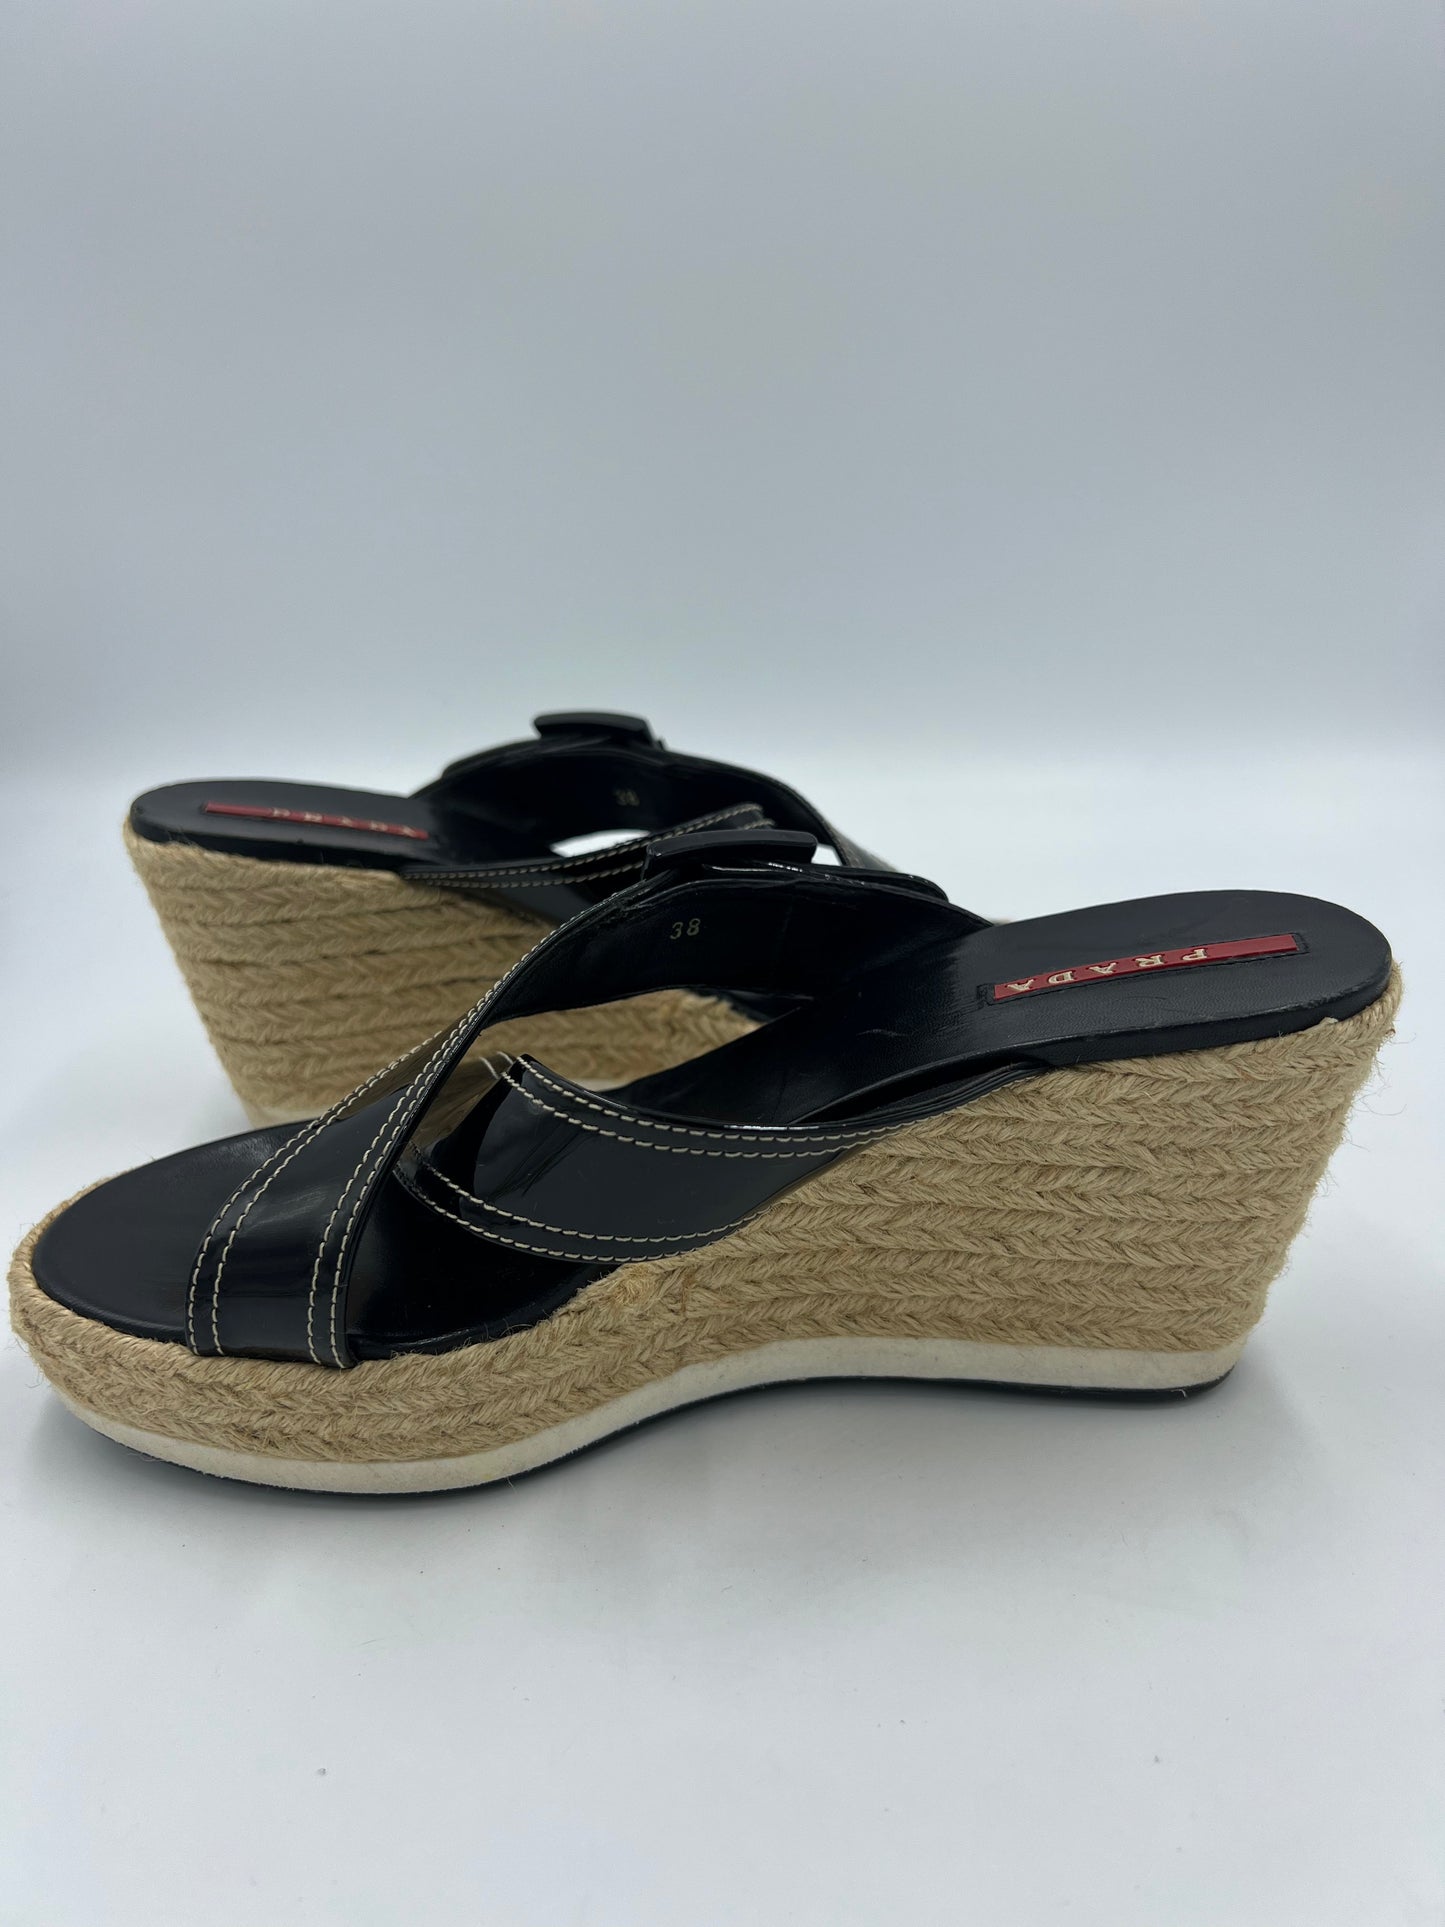 Prada Crossover Leather Wedge Sandals  Size: 8/38